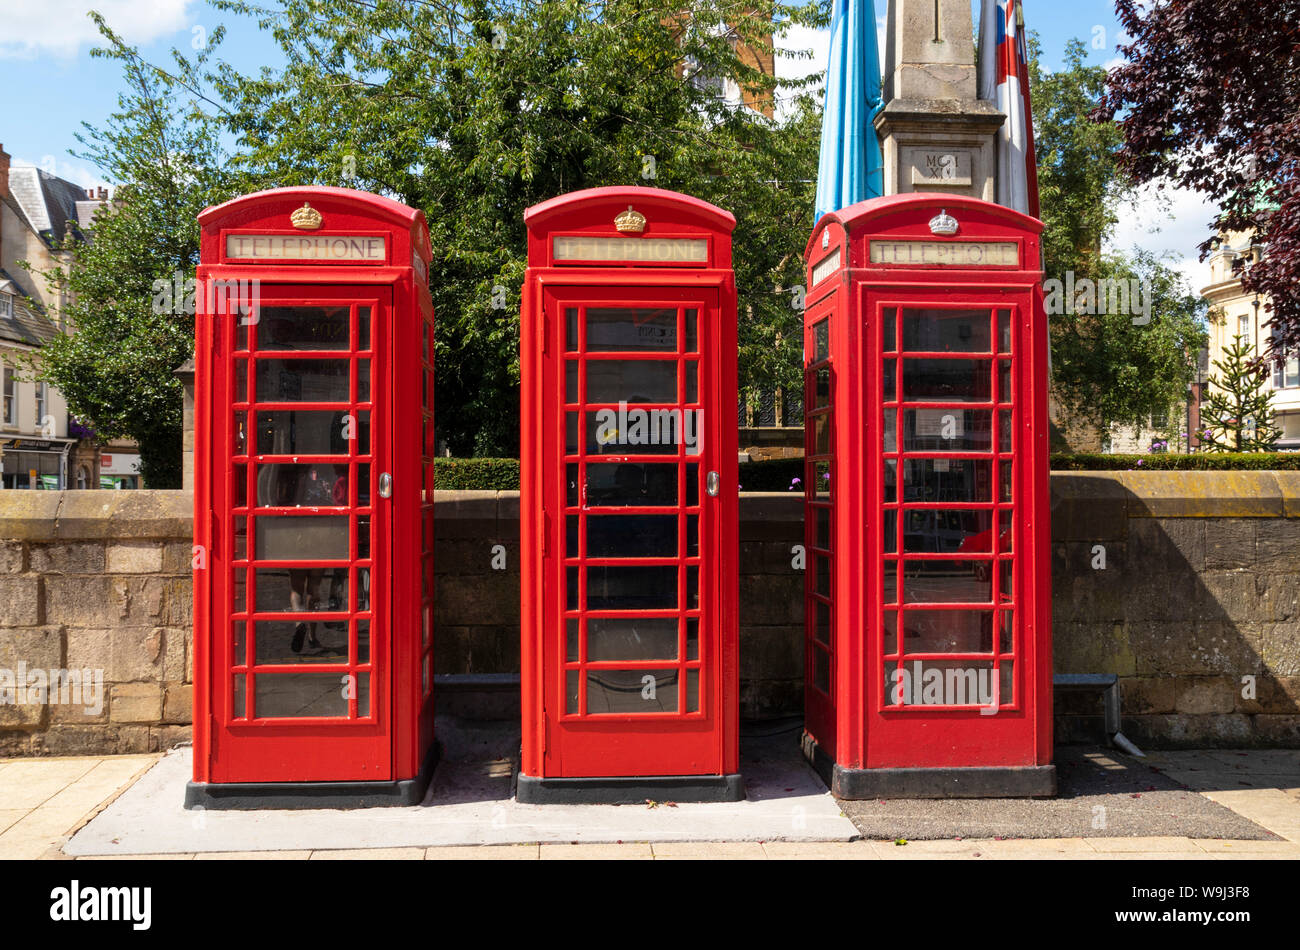 Red telephone boxes in a row three red phone boxes phone kiosk telephone boxes Northampton town centre Northamptonshire England UK GB Europe Stock Photo